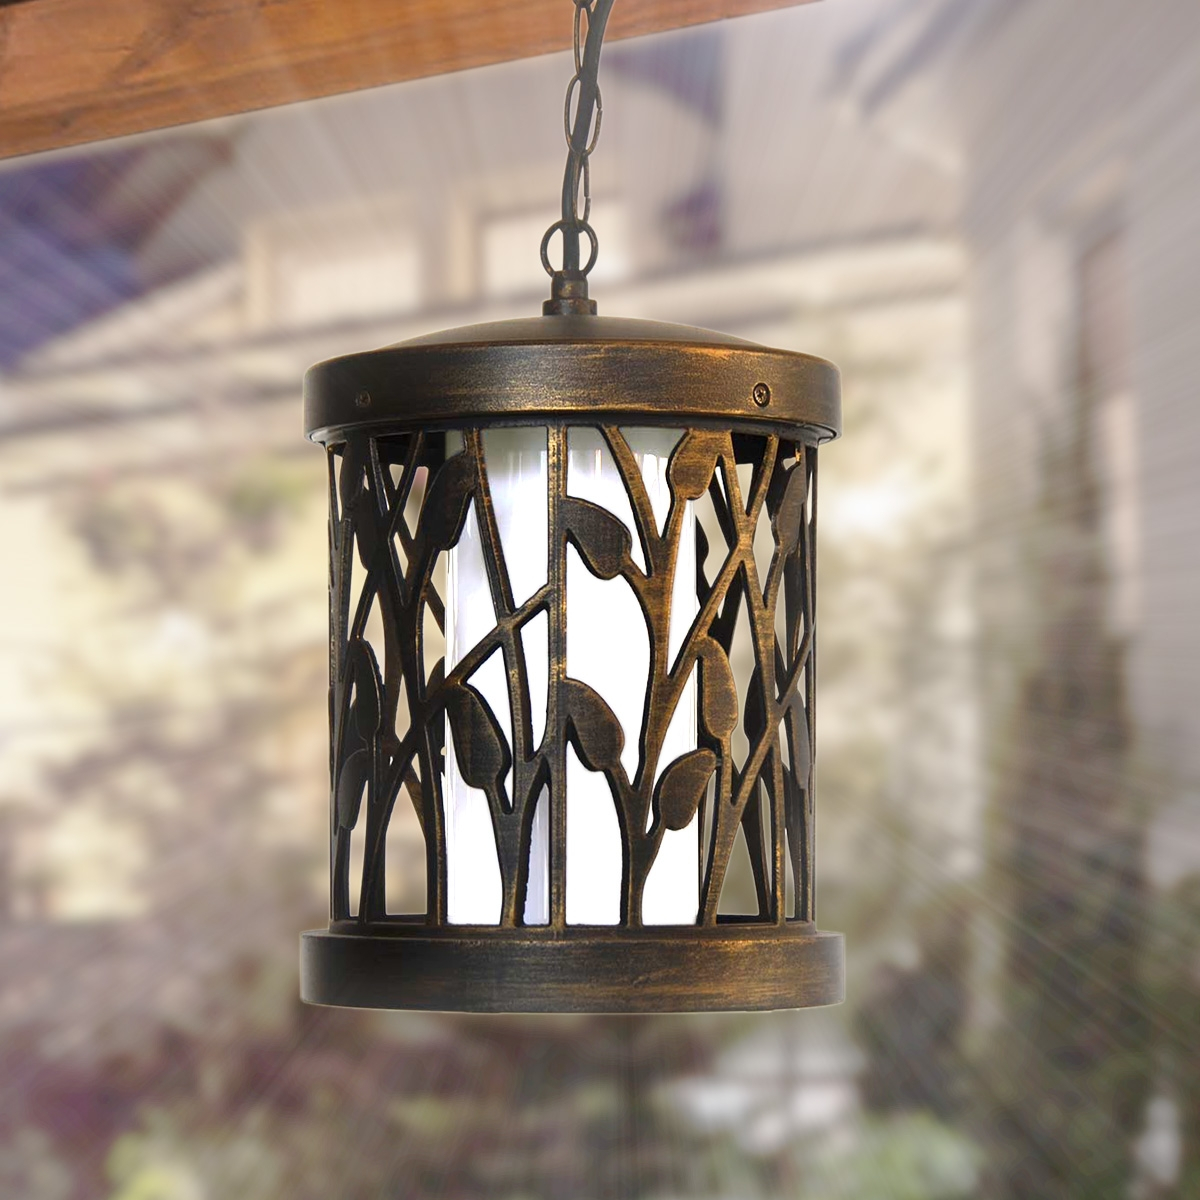 Outdoor Wall Light 7202 E27 Glass Diffuser - Goldmine (Not The Actual Photo)